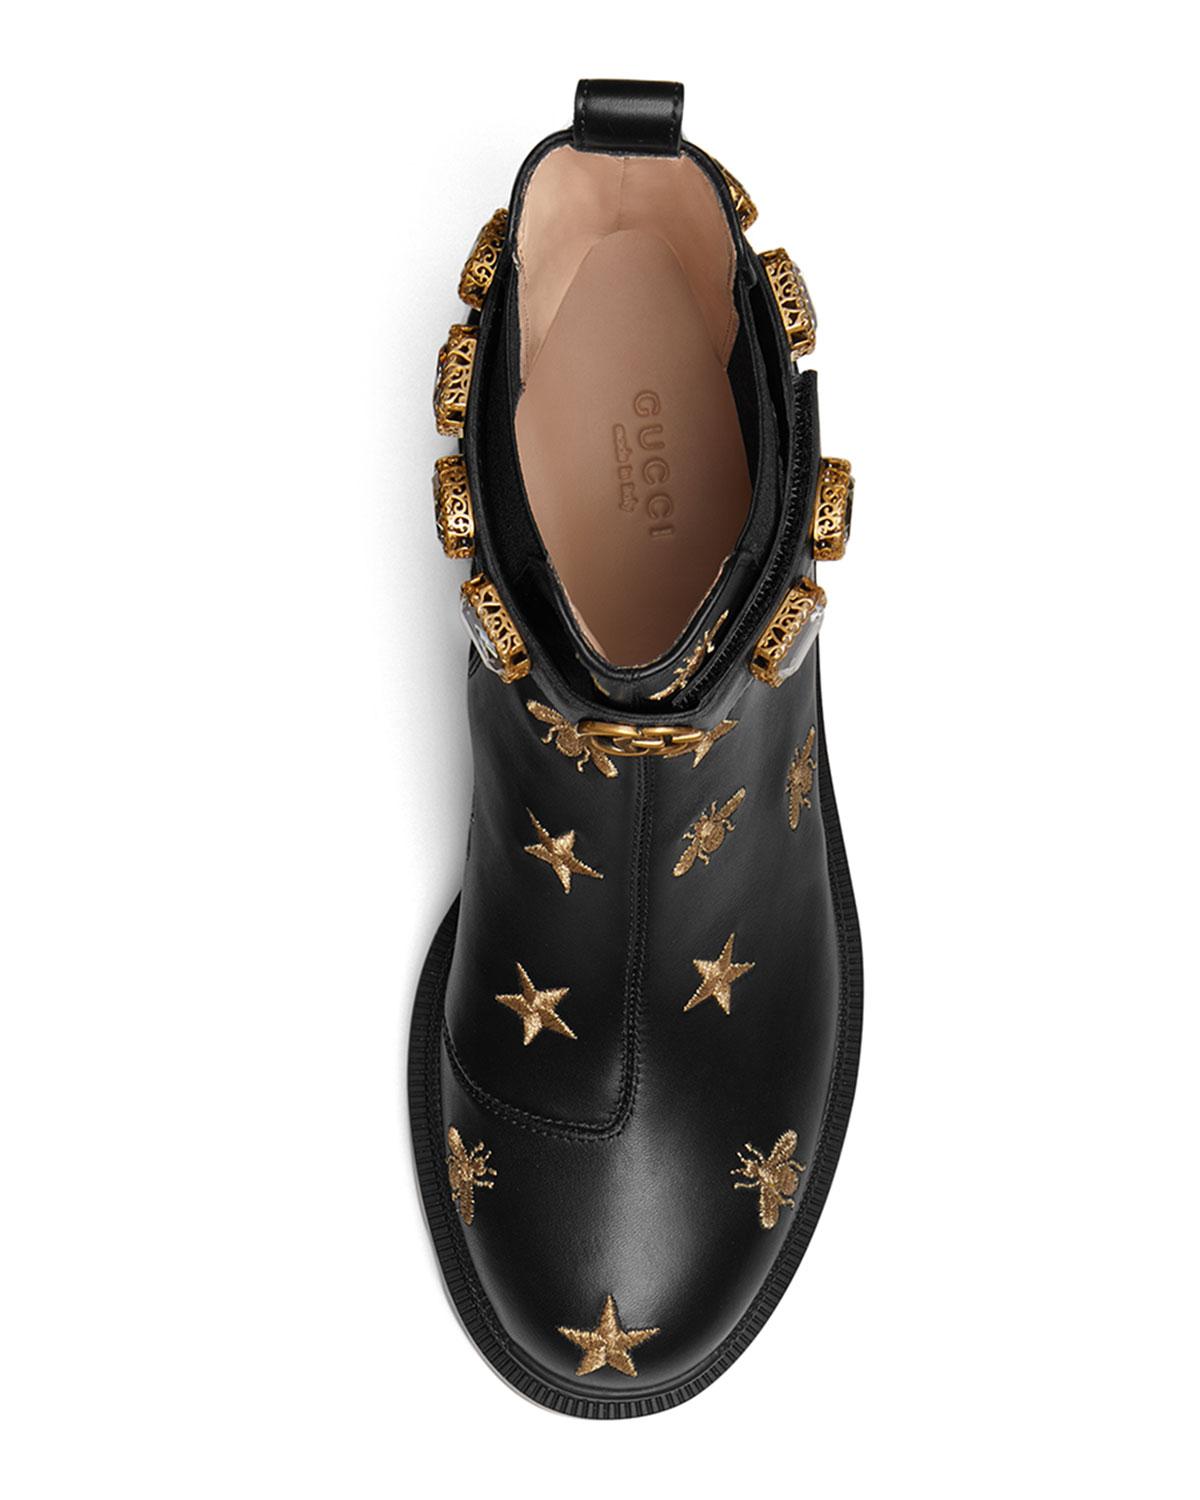 gucci bee and star boots